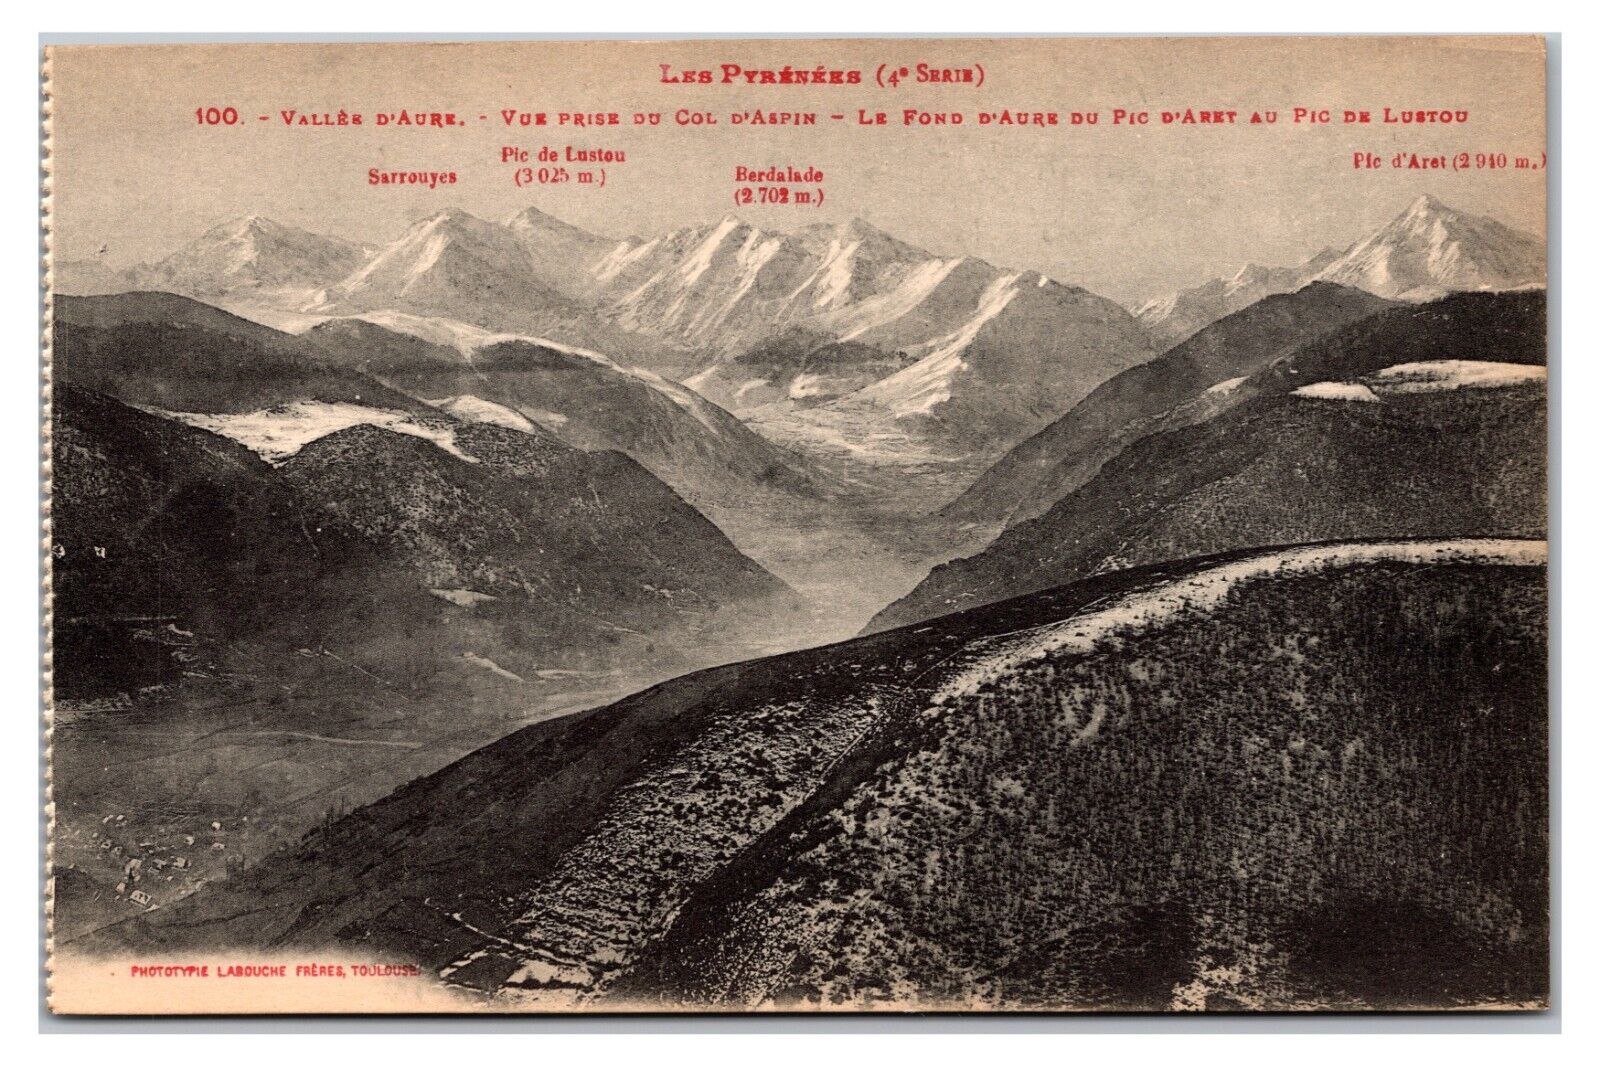 Antique 1910s - The Pyrenees Mountains - France Postcard (UnPosted)